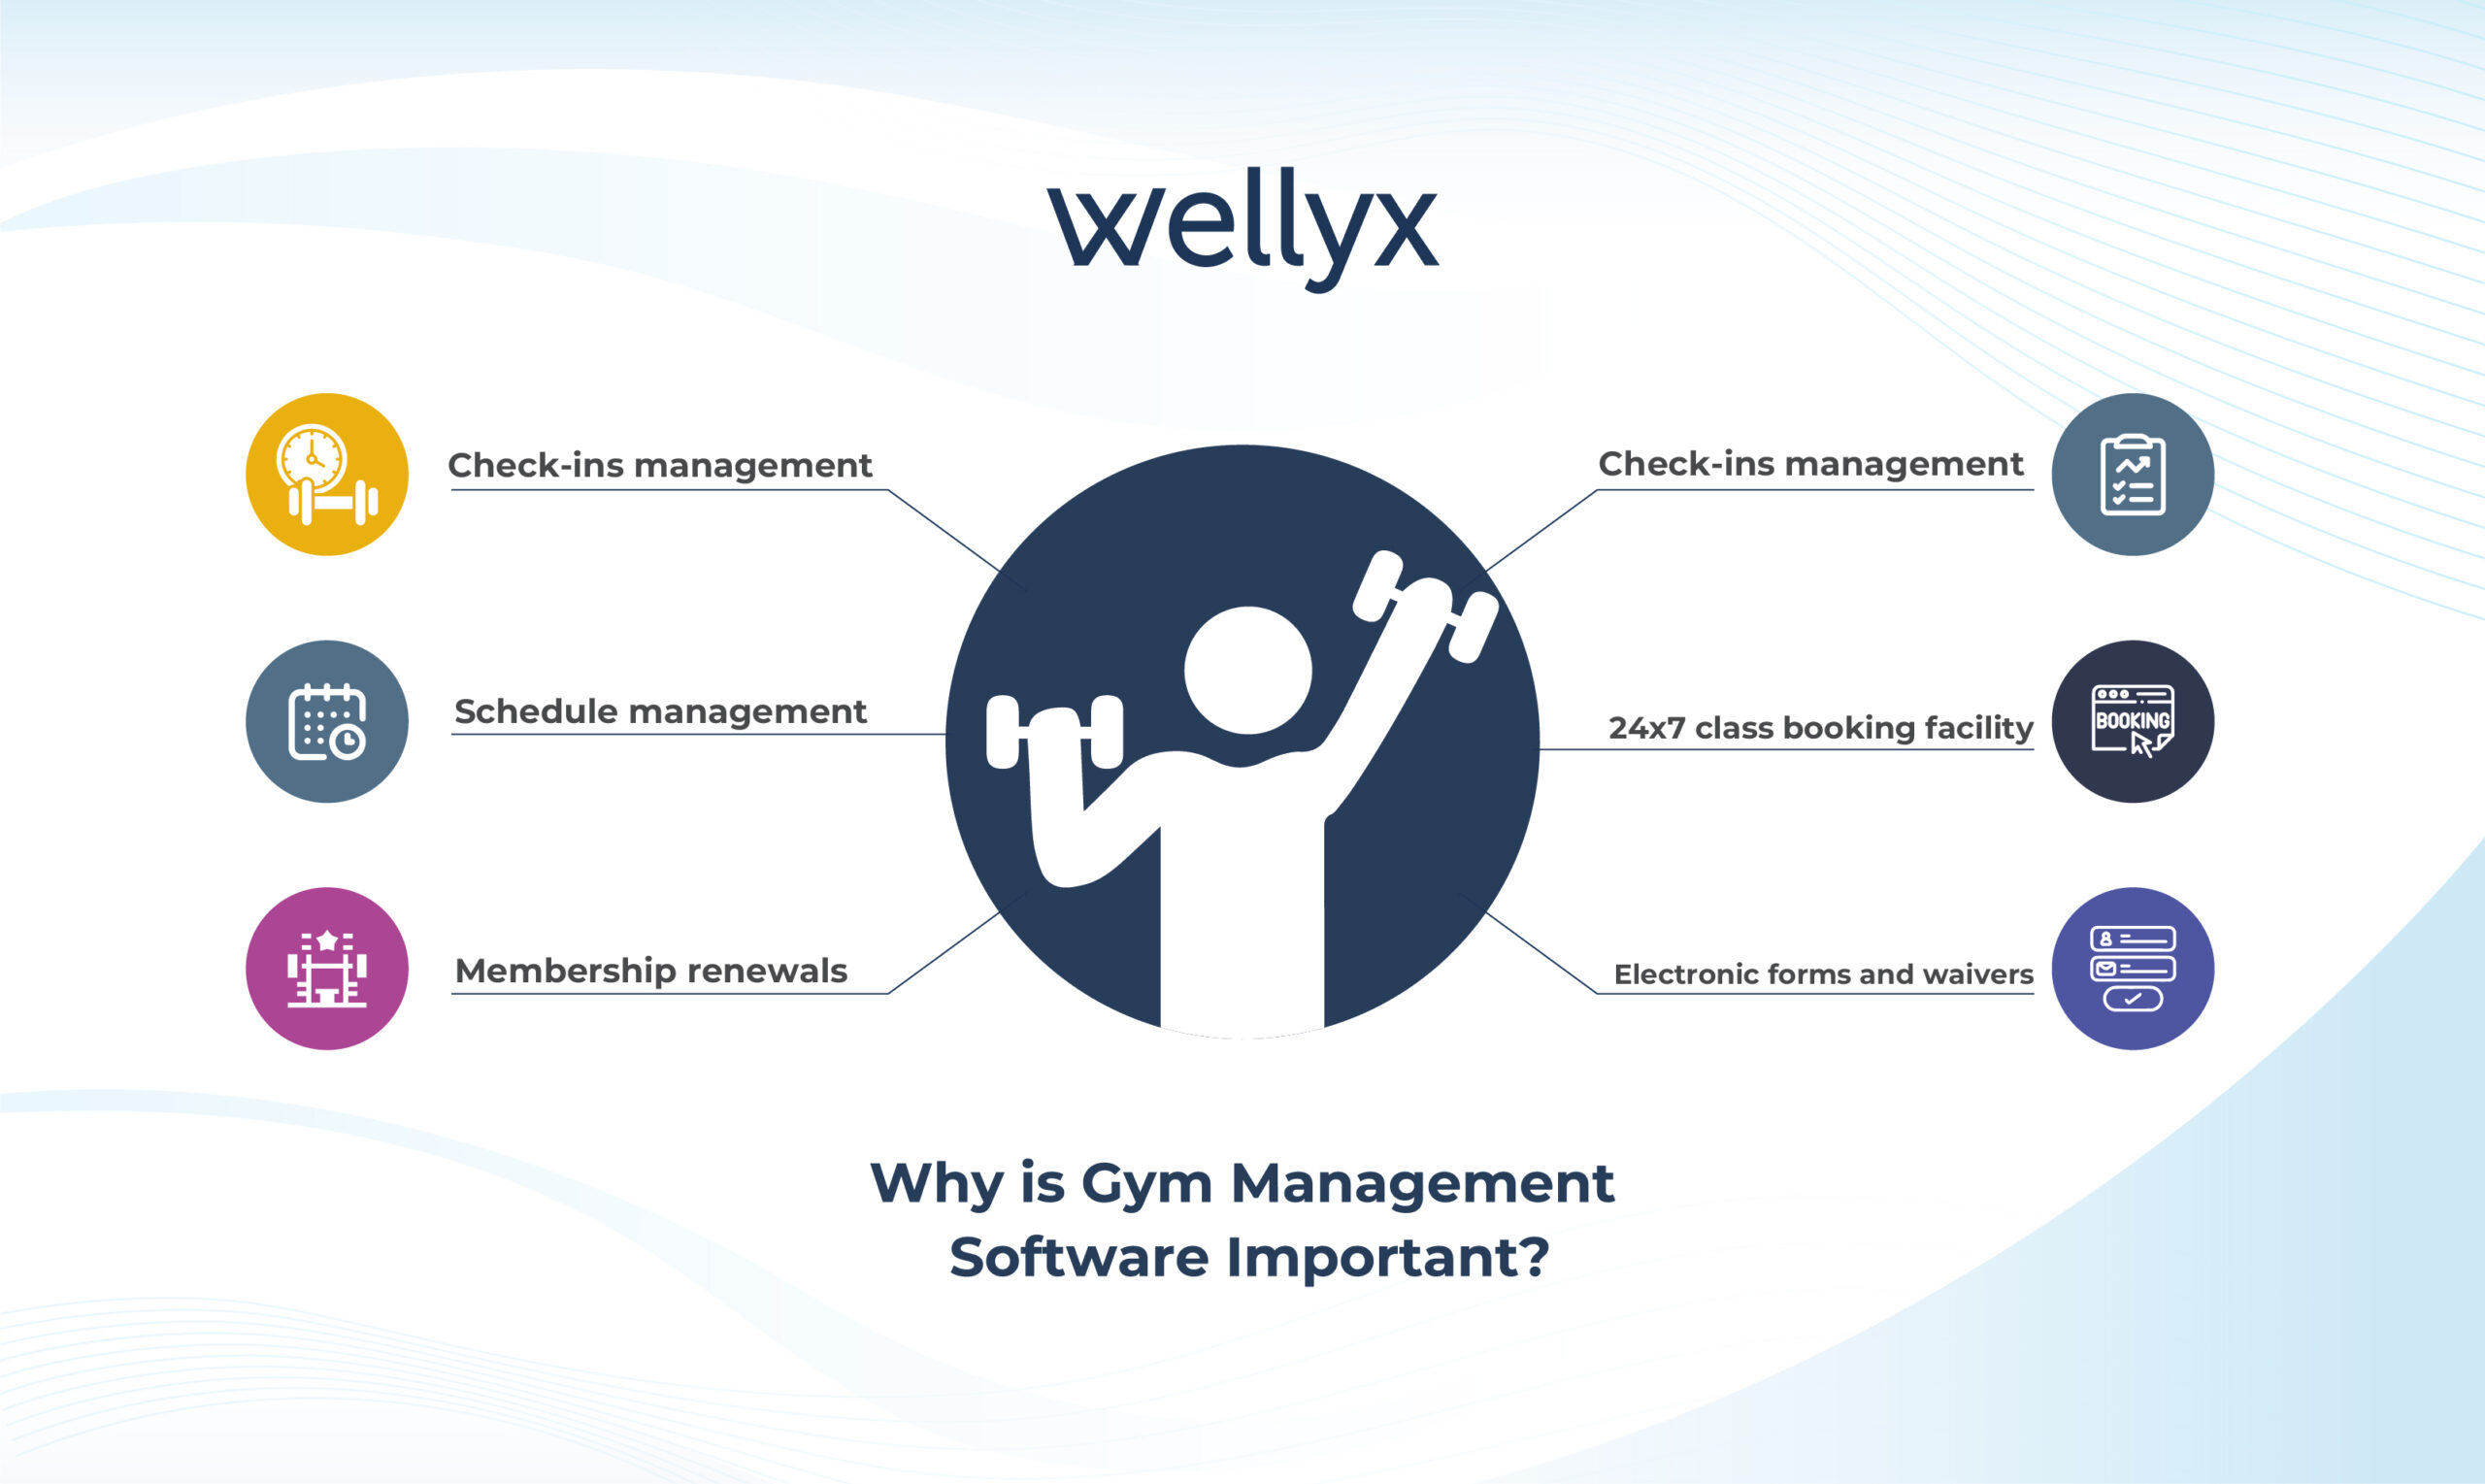 Why is Gym Management Software Important